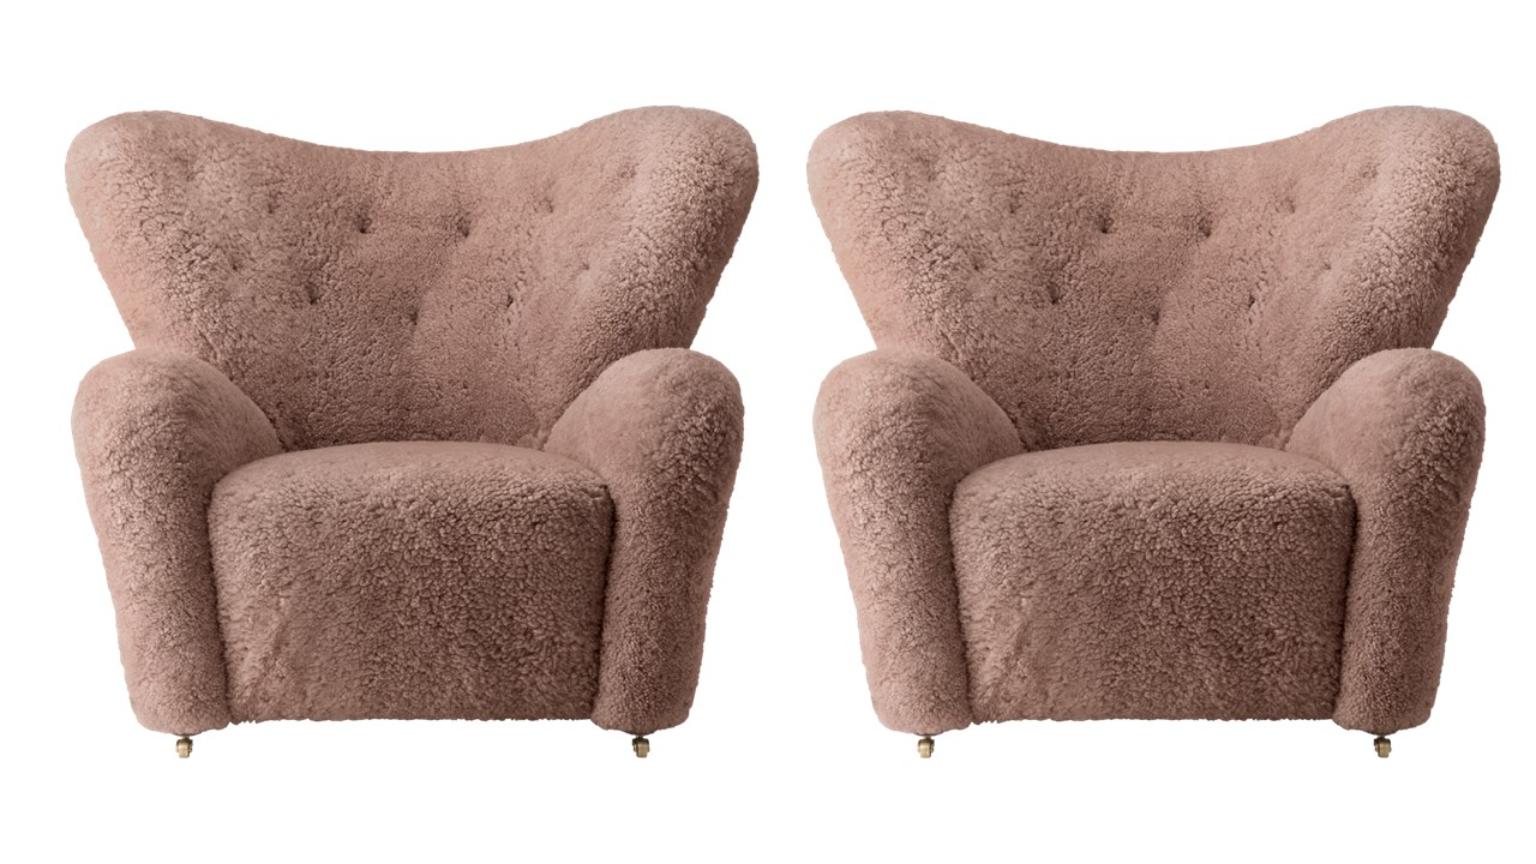 Set of 2 Sahara Sheepskin the tired man lounge chair by Lassen.
Dimensions: W 102 x D 87 x H 88 cm. 
Materials: Sheepskin.

Flemming Lassen designed the overstuffed easy chair, The Tired Man, for The Copenhagen Cabinetmakers’ Guild Competition